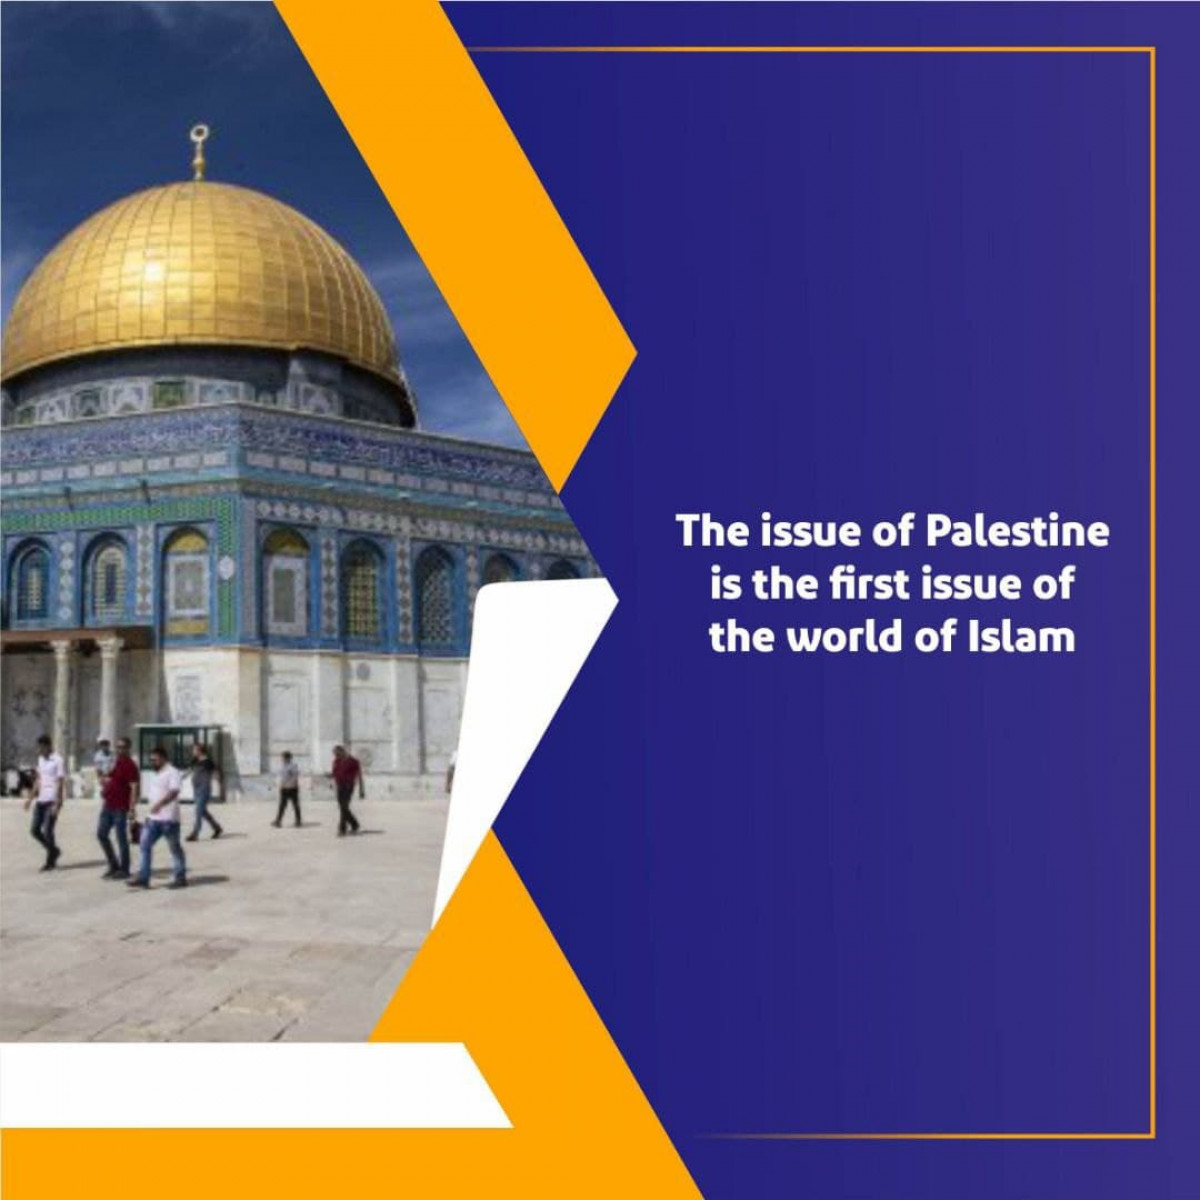 The issue of Palestine is the first issue of the world of Islam